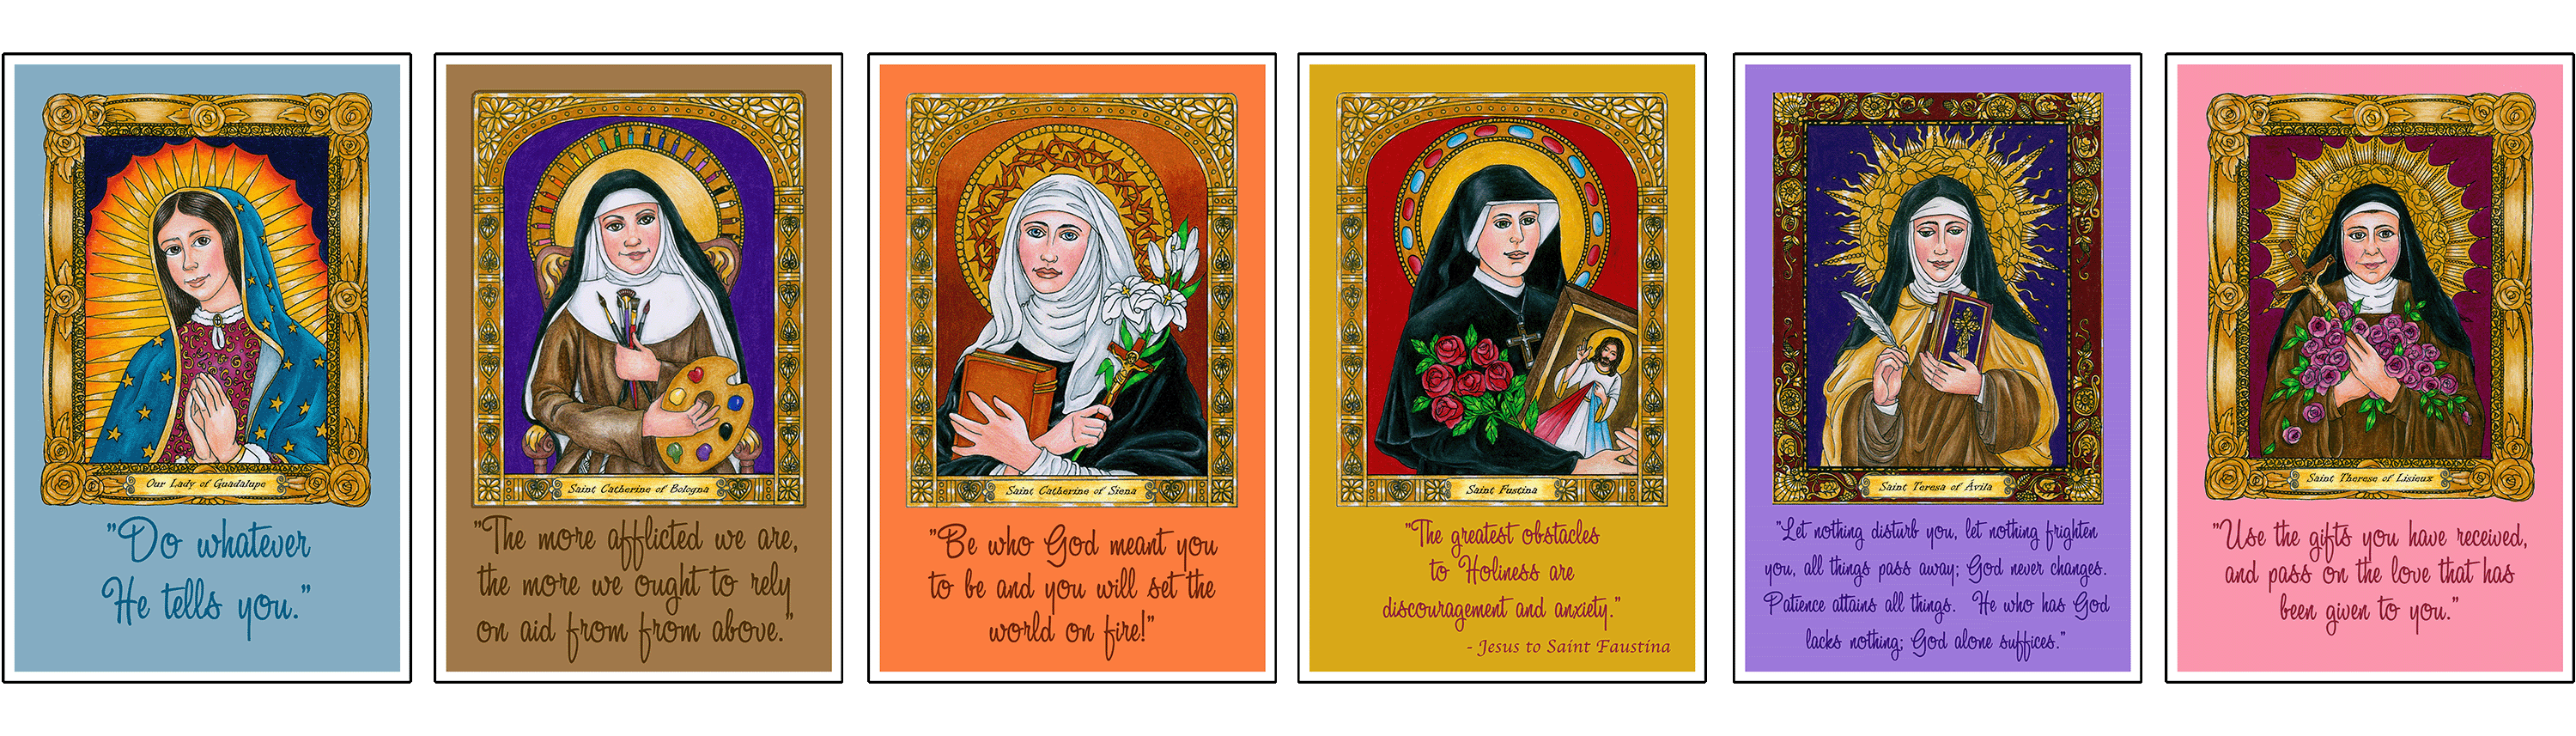 Amazing Quotes from Strong Female Saints